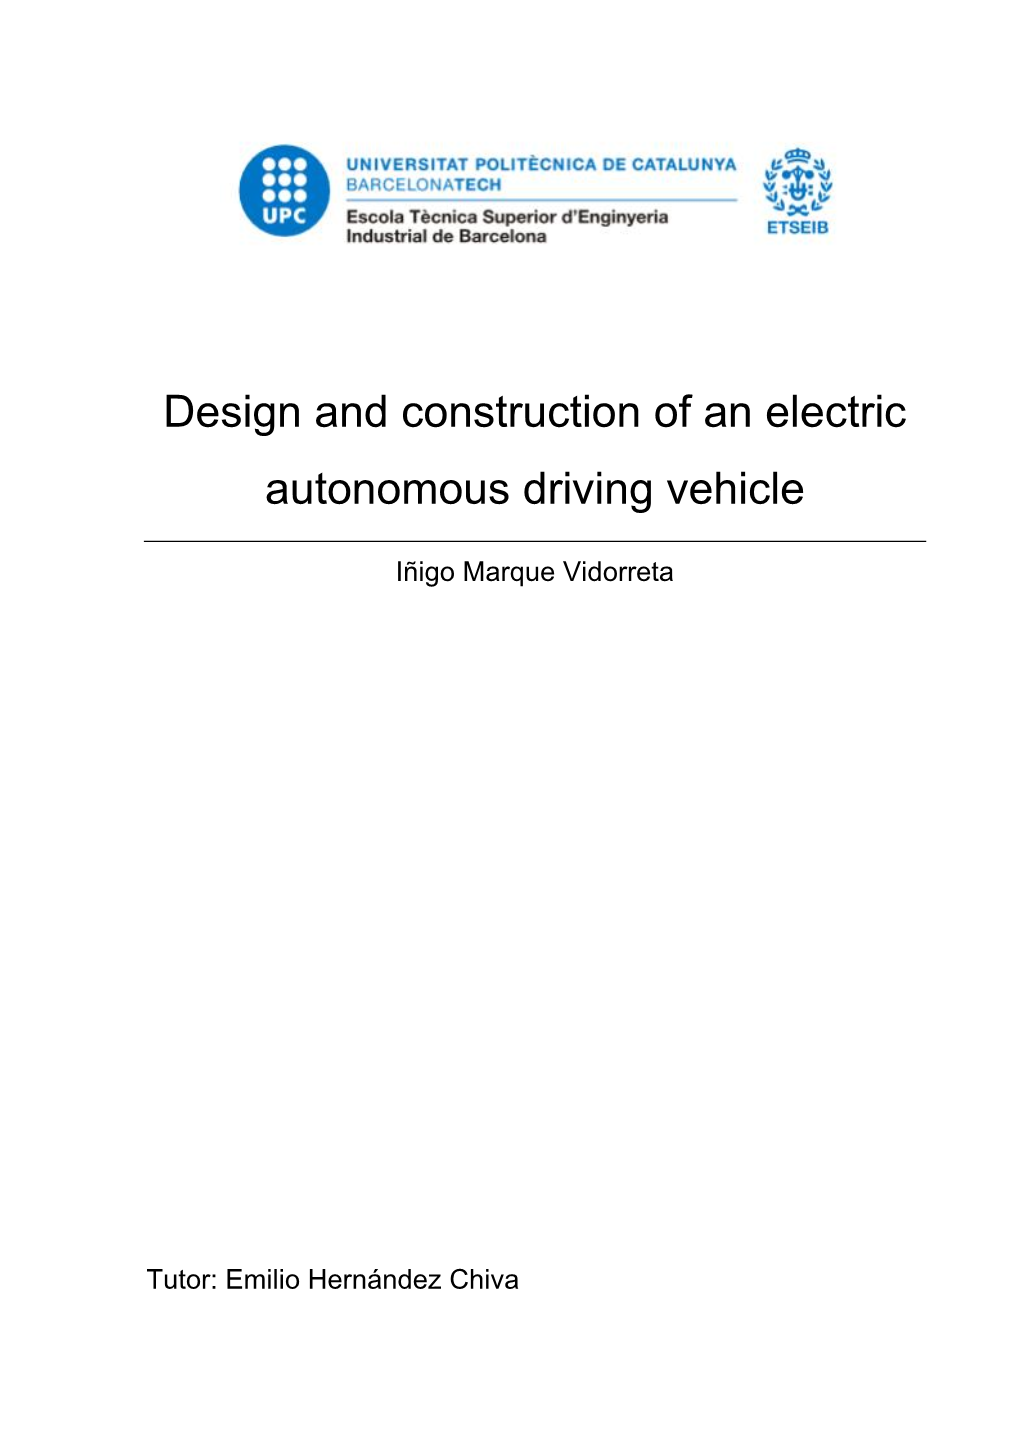 Design and Construction of an Electric Autonomous Driving Vehicle